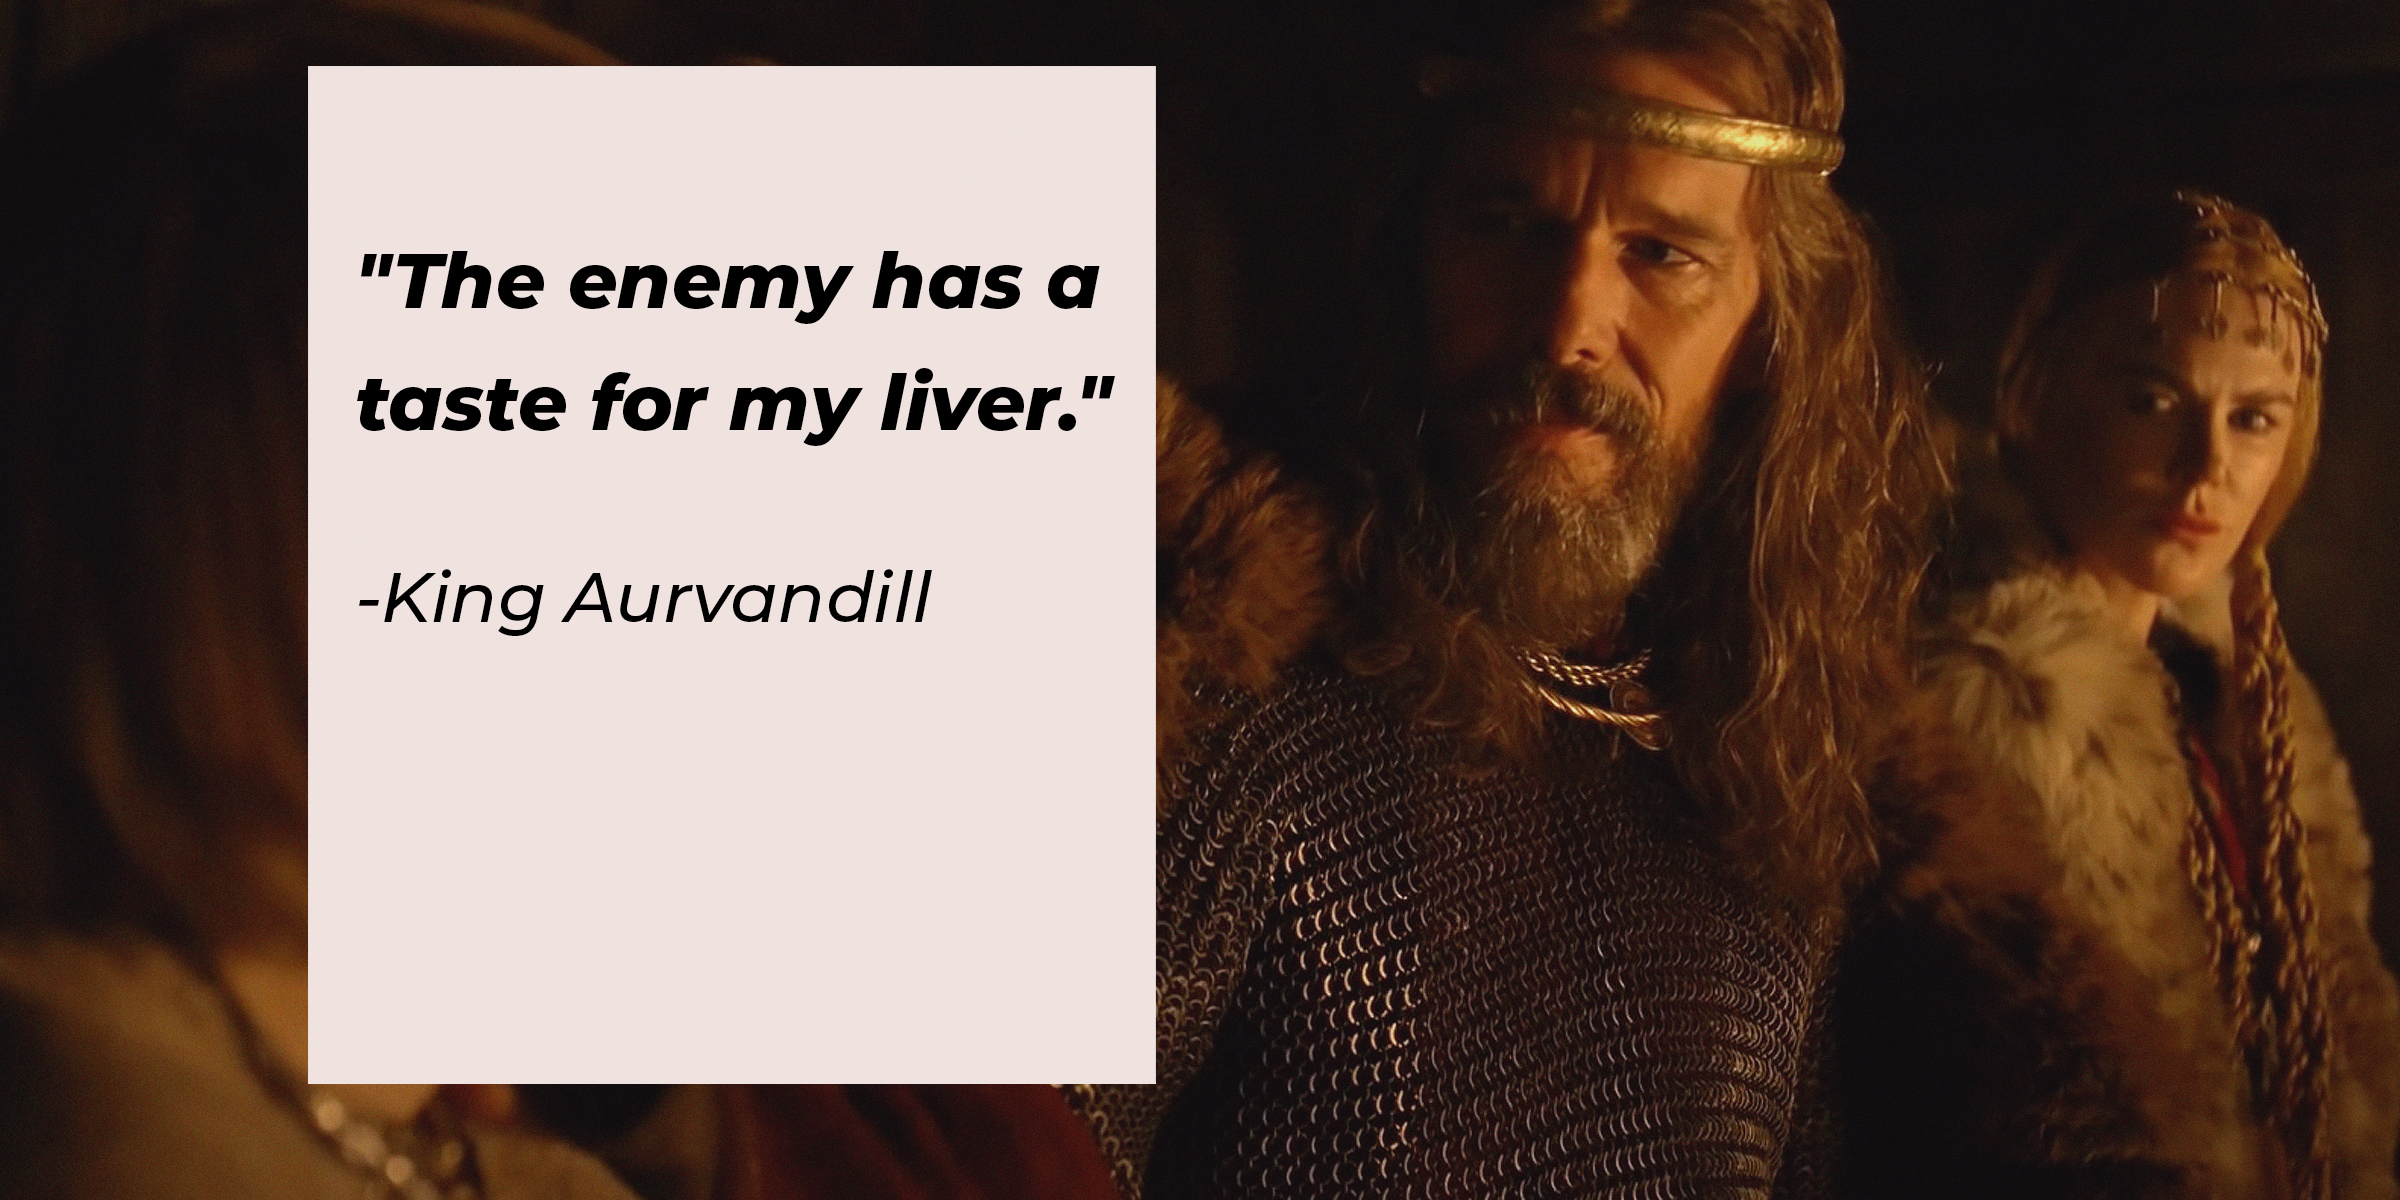 Photo of King Aurvandill and Queen Gudrún with the quote: "The enemy has a taste for my liver." | Source: Facebook.com/TheNorthmanFilm